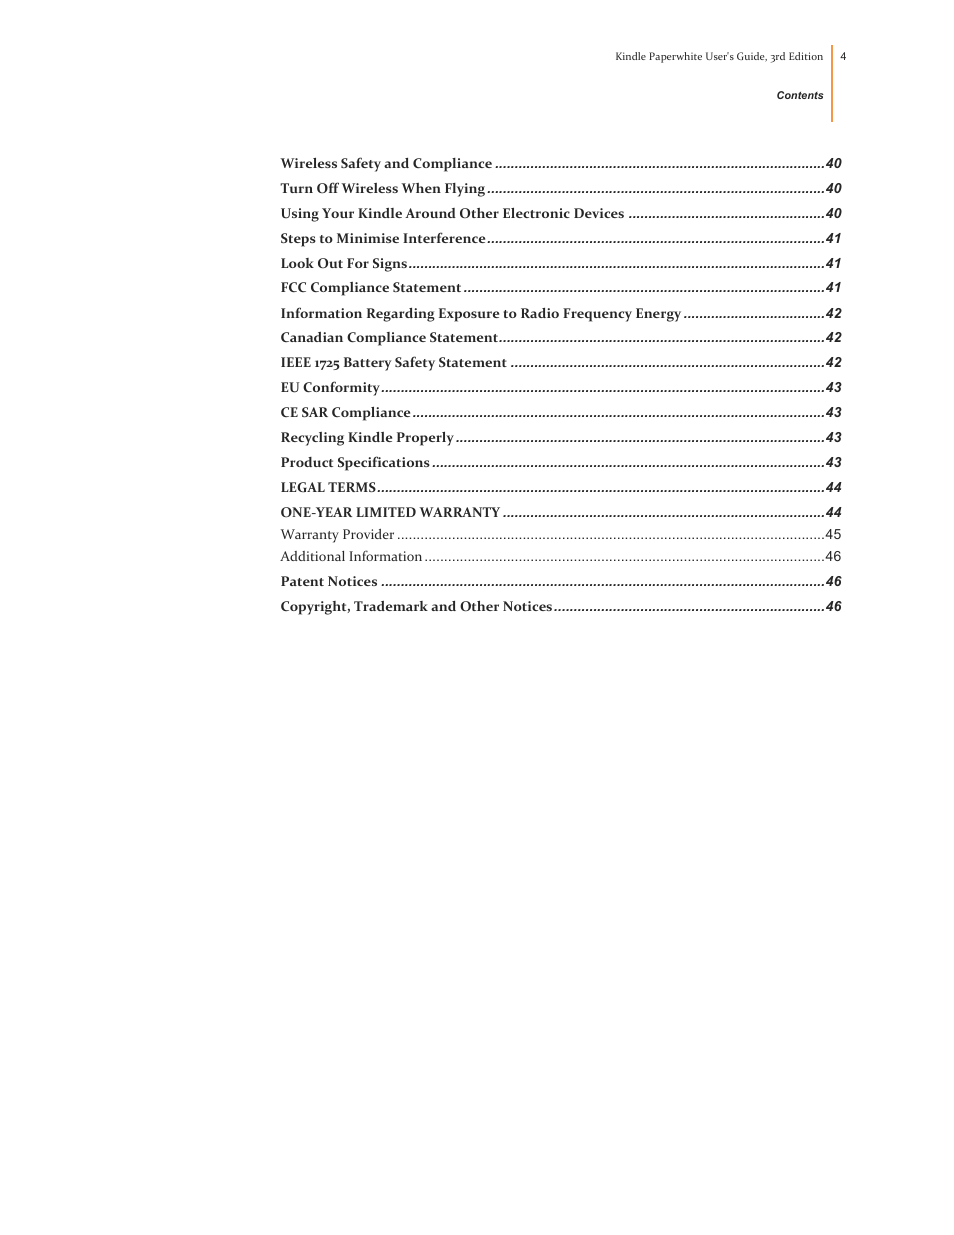 Kindle Paperwhite (2nd Generation) User Manual | Page 4 / 47